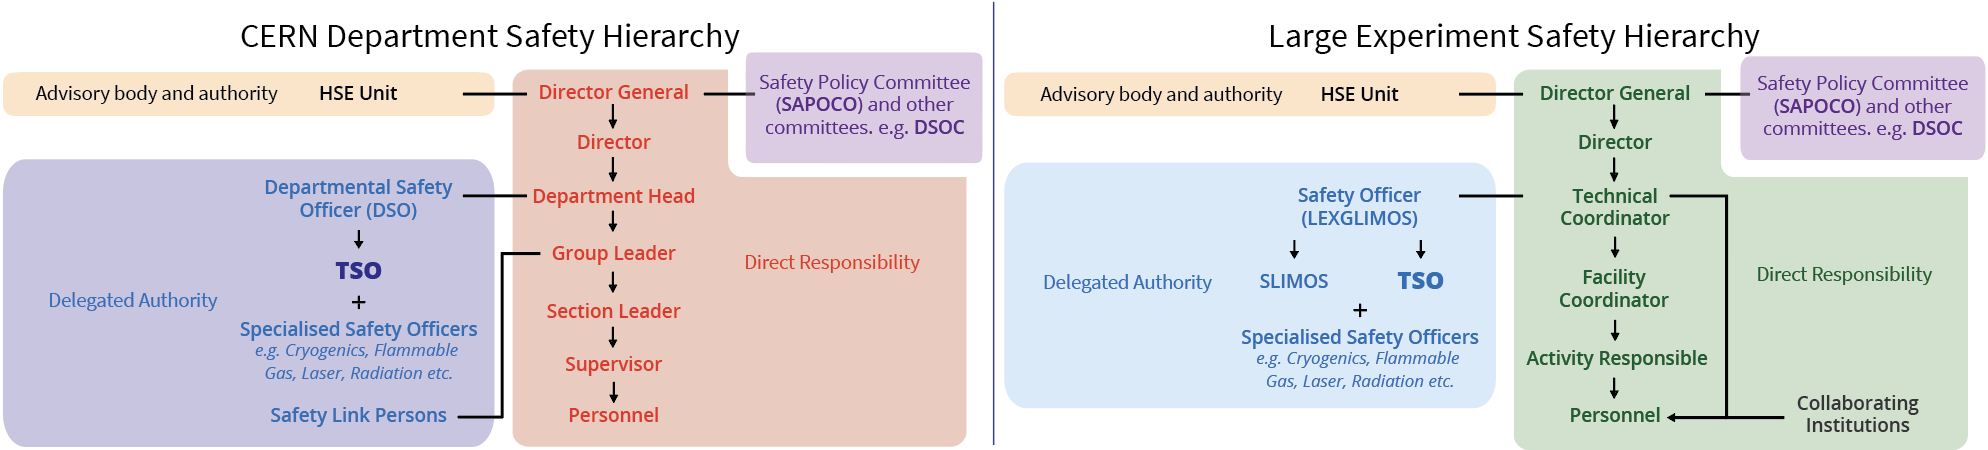 The safety heirachy at CERN. The DG, directors, and department heads have direct responsibility for safety. Department heads give delegated authority to a DSO or LEXGLIMOS, who in turn appoint the TSO and specialist officers.